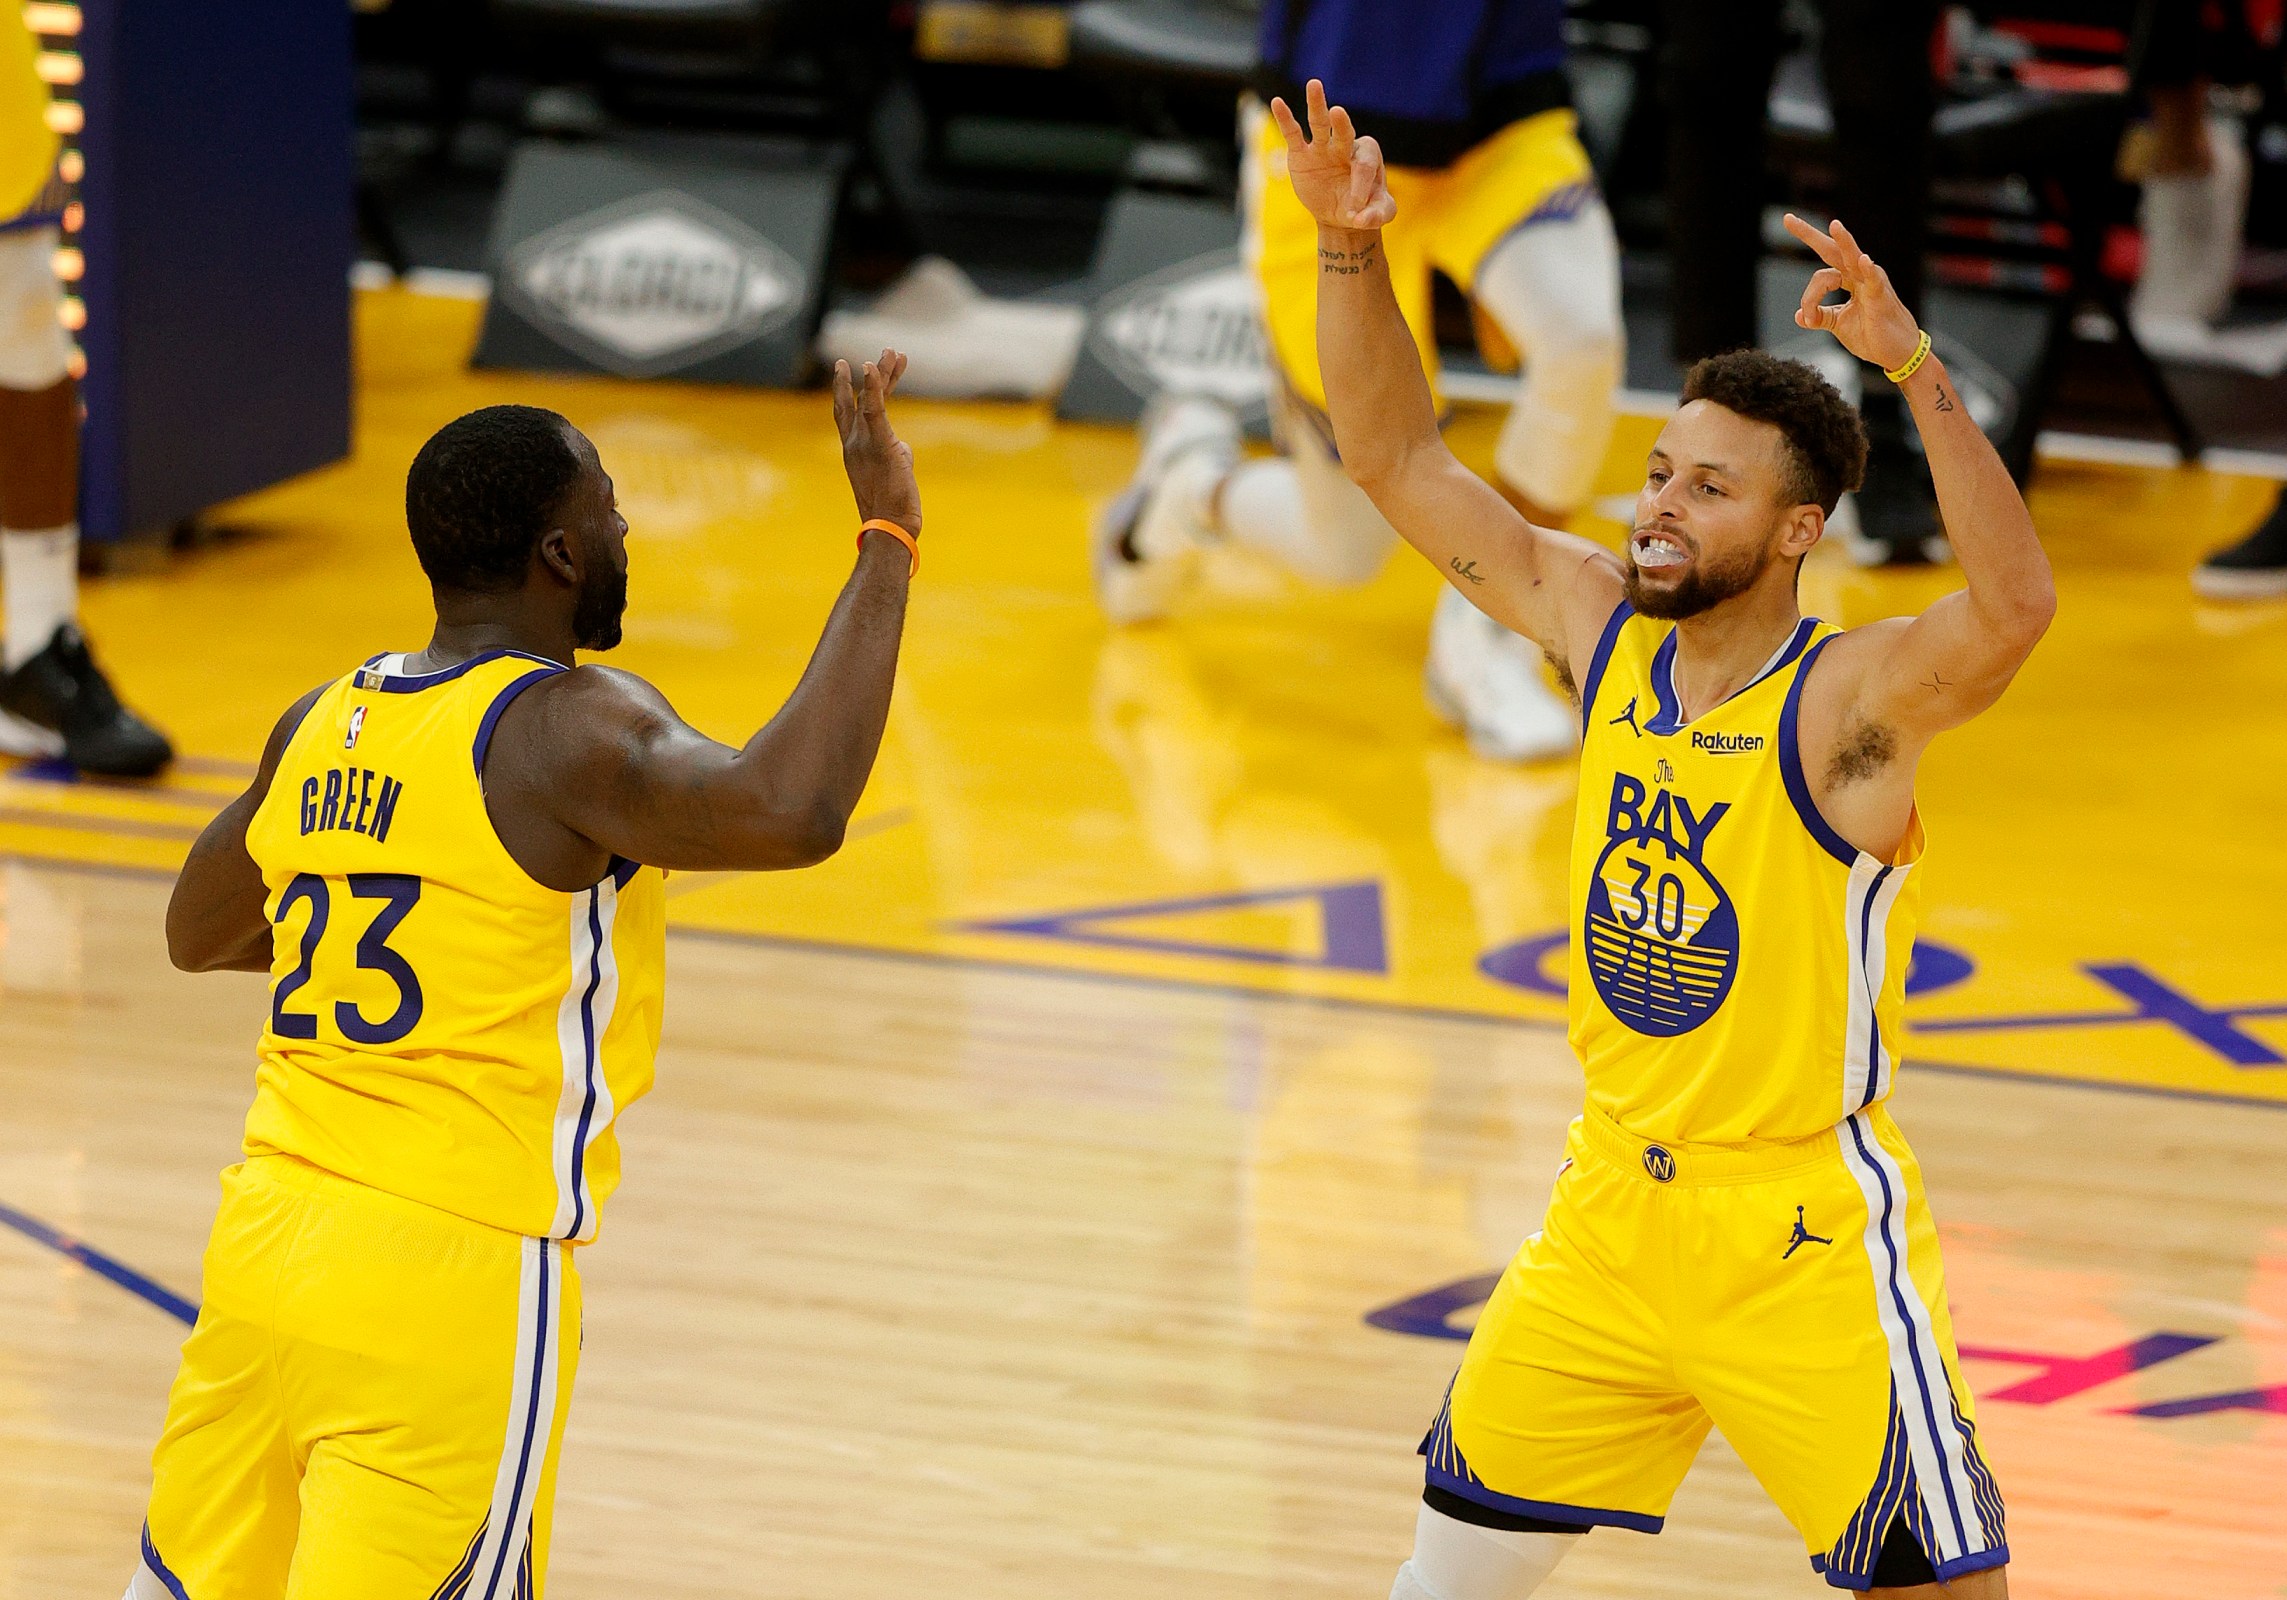 Steph Curry celebrates a make with Draymond Green.